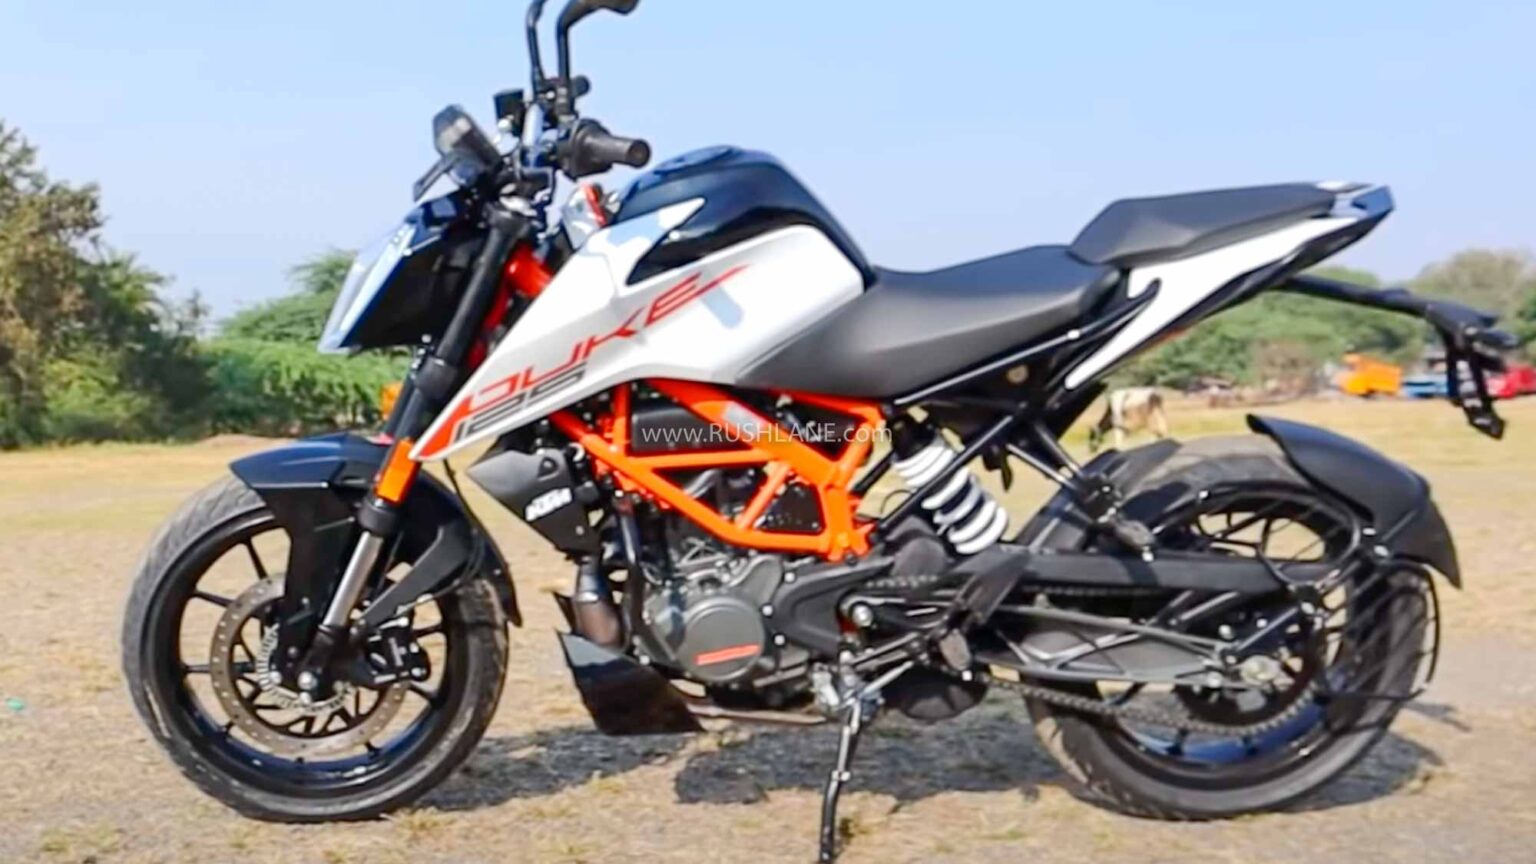 New KTM Duke 125 Launch Price Rs 1.5 Lakh First Look Walkaround